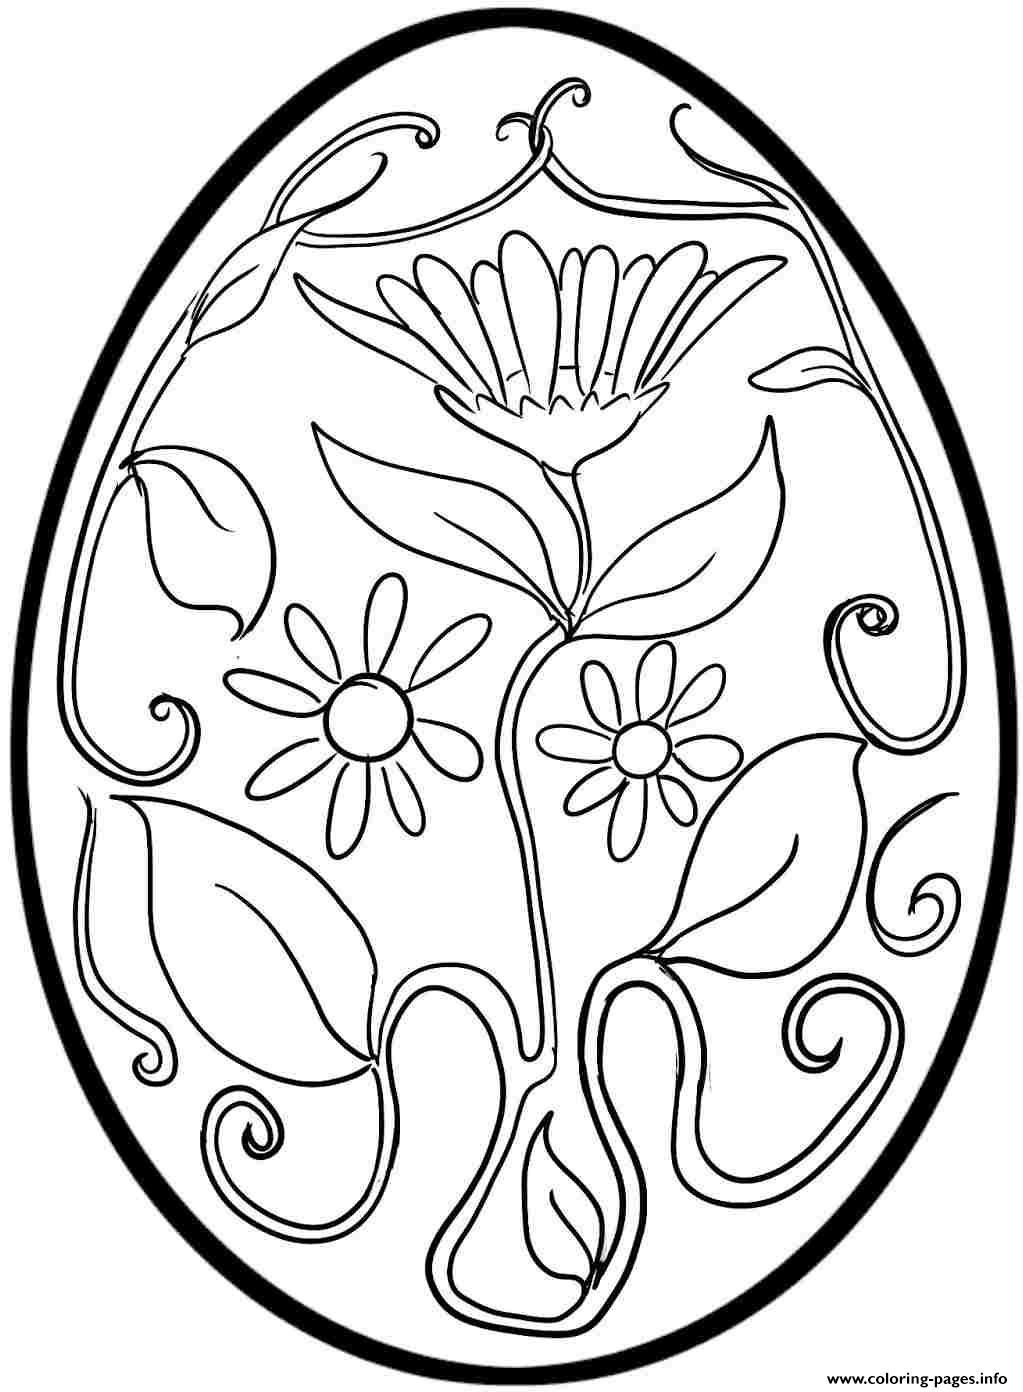 Coloring Pages For Adults Easter Easter Egg With Flowers For Adult Coloring Pages Printable